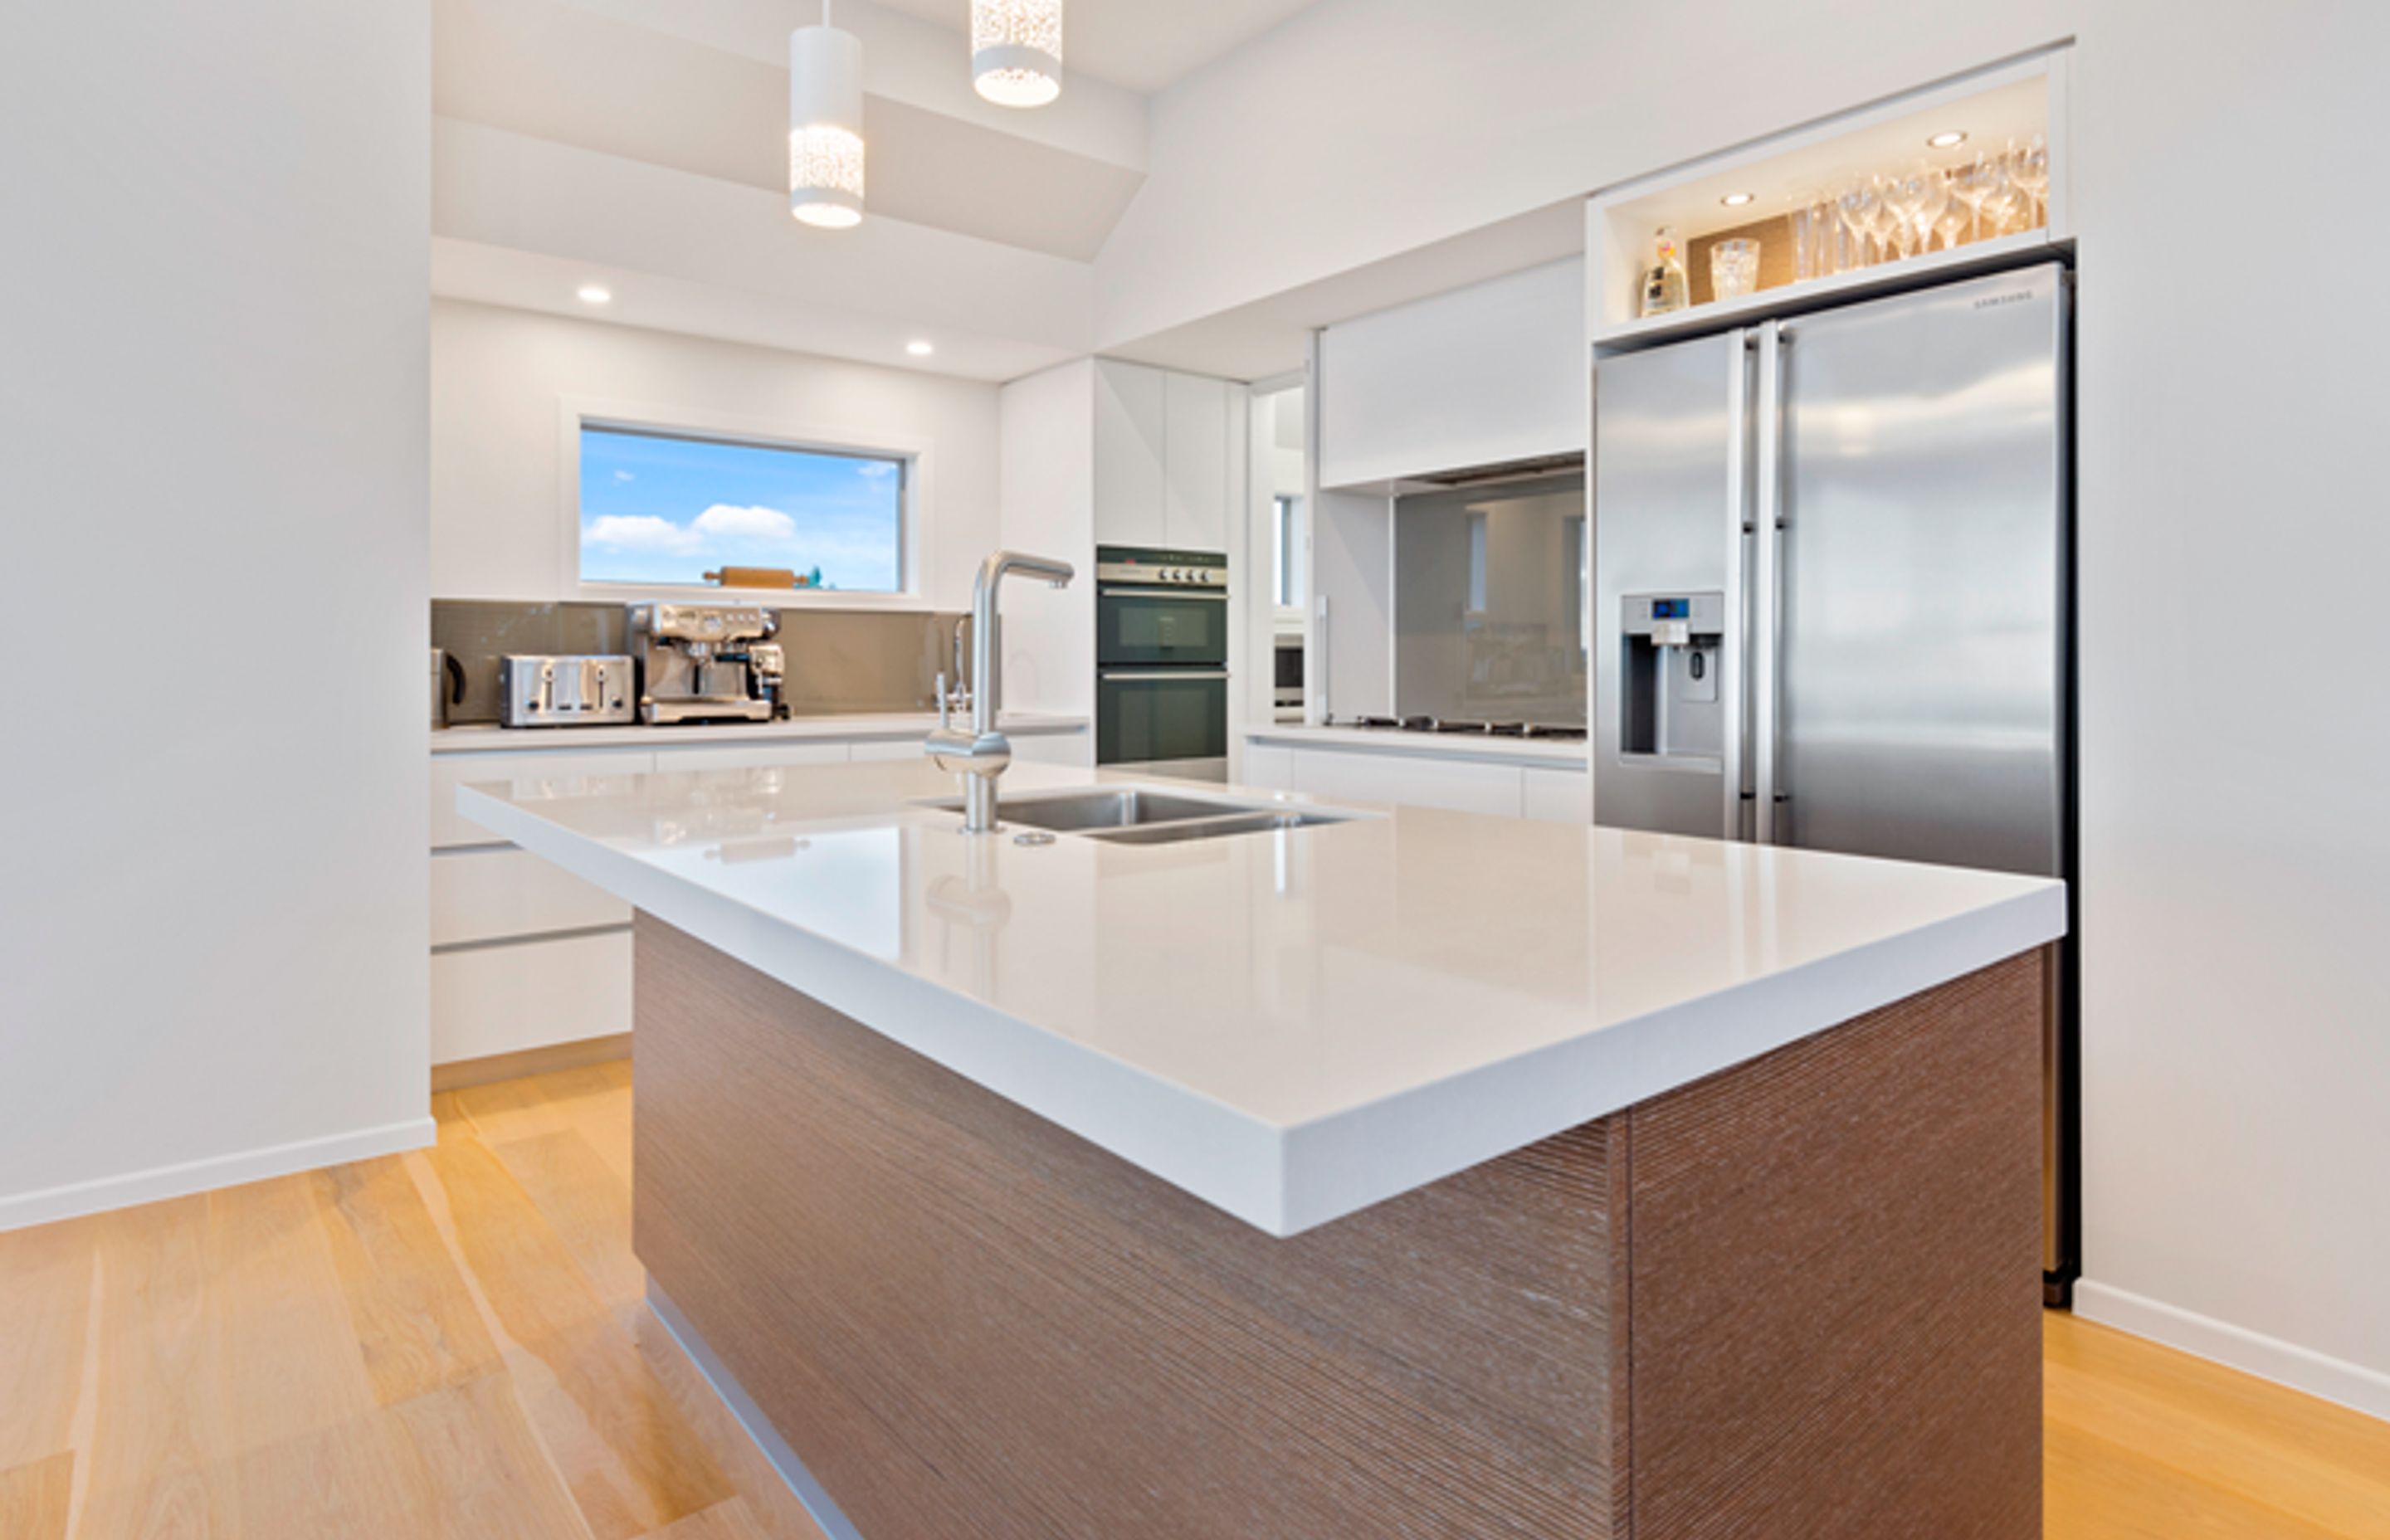 Open plan family kitchen designed for entertaining and enjoying life at the beach. 